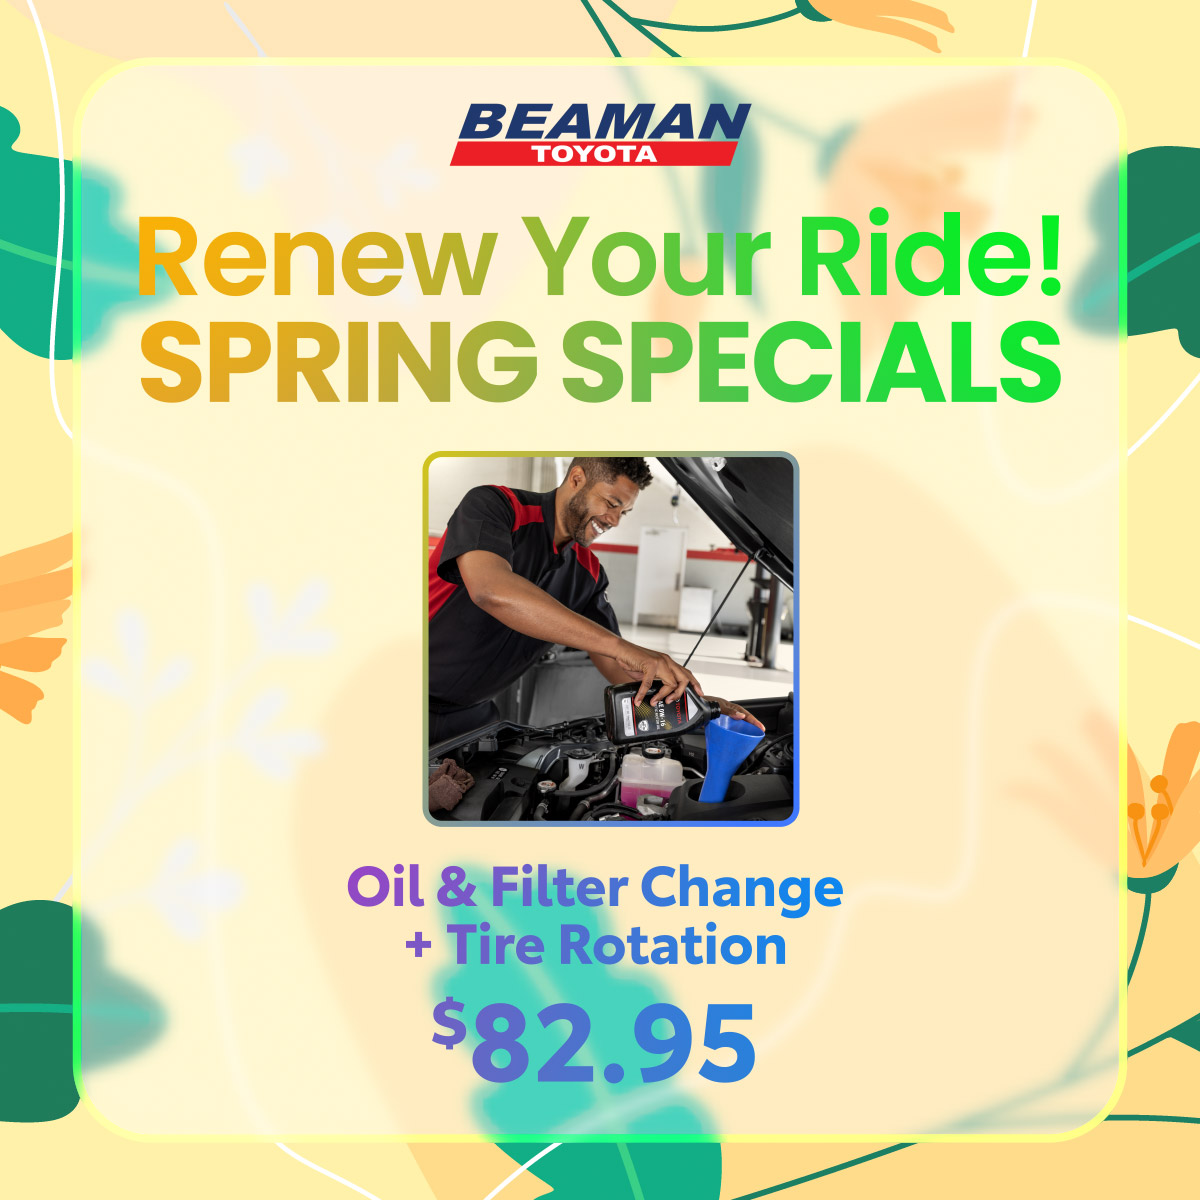 Oil and Filter Change + Tire Rotation $82.95